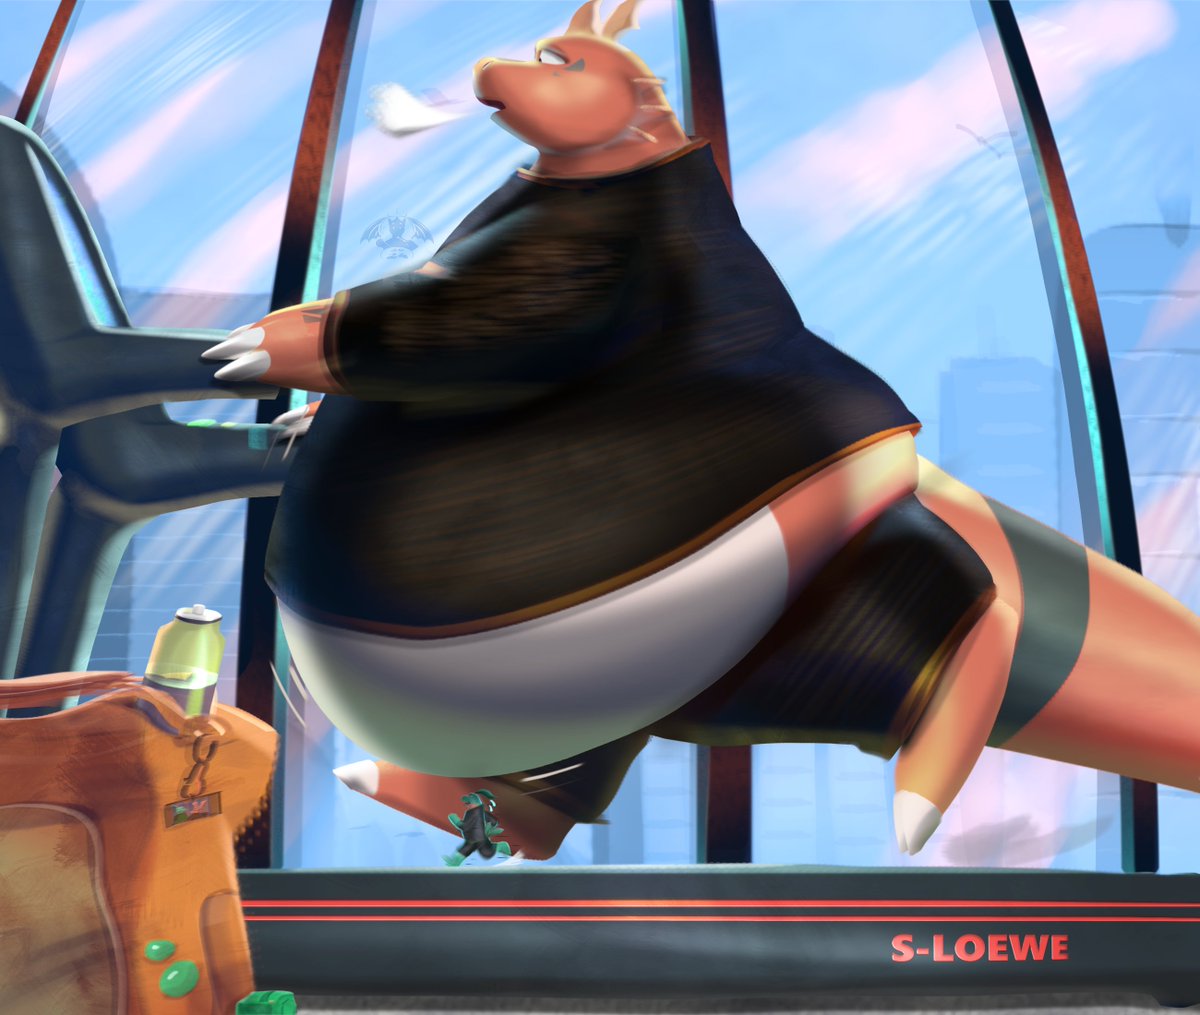 Two furs in tandem on a treadmill - one of them at a walking pace, the other running like their life depends on it. Yet both are moving at the same speed. How could this be possible?! A little surprise for @FattyDragonite starring his dynamic duo of Matt and Gary!